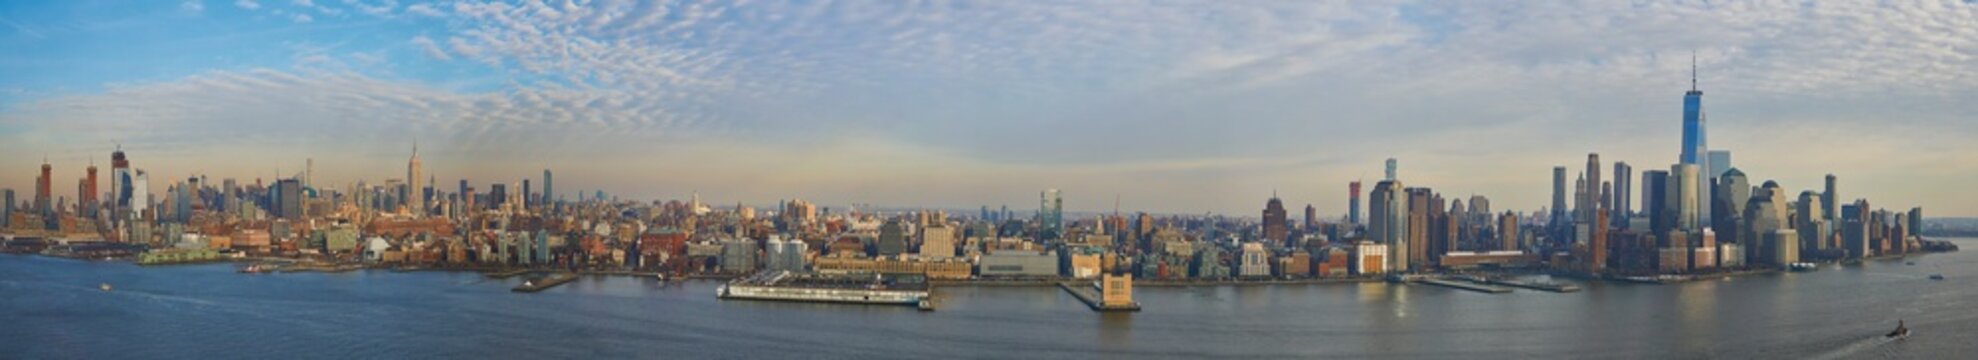 Ultra wide panorama of Manhattan skyline showing downtown financial district and midtown up to central park